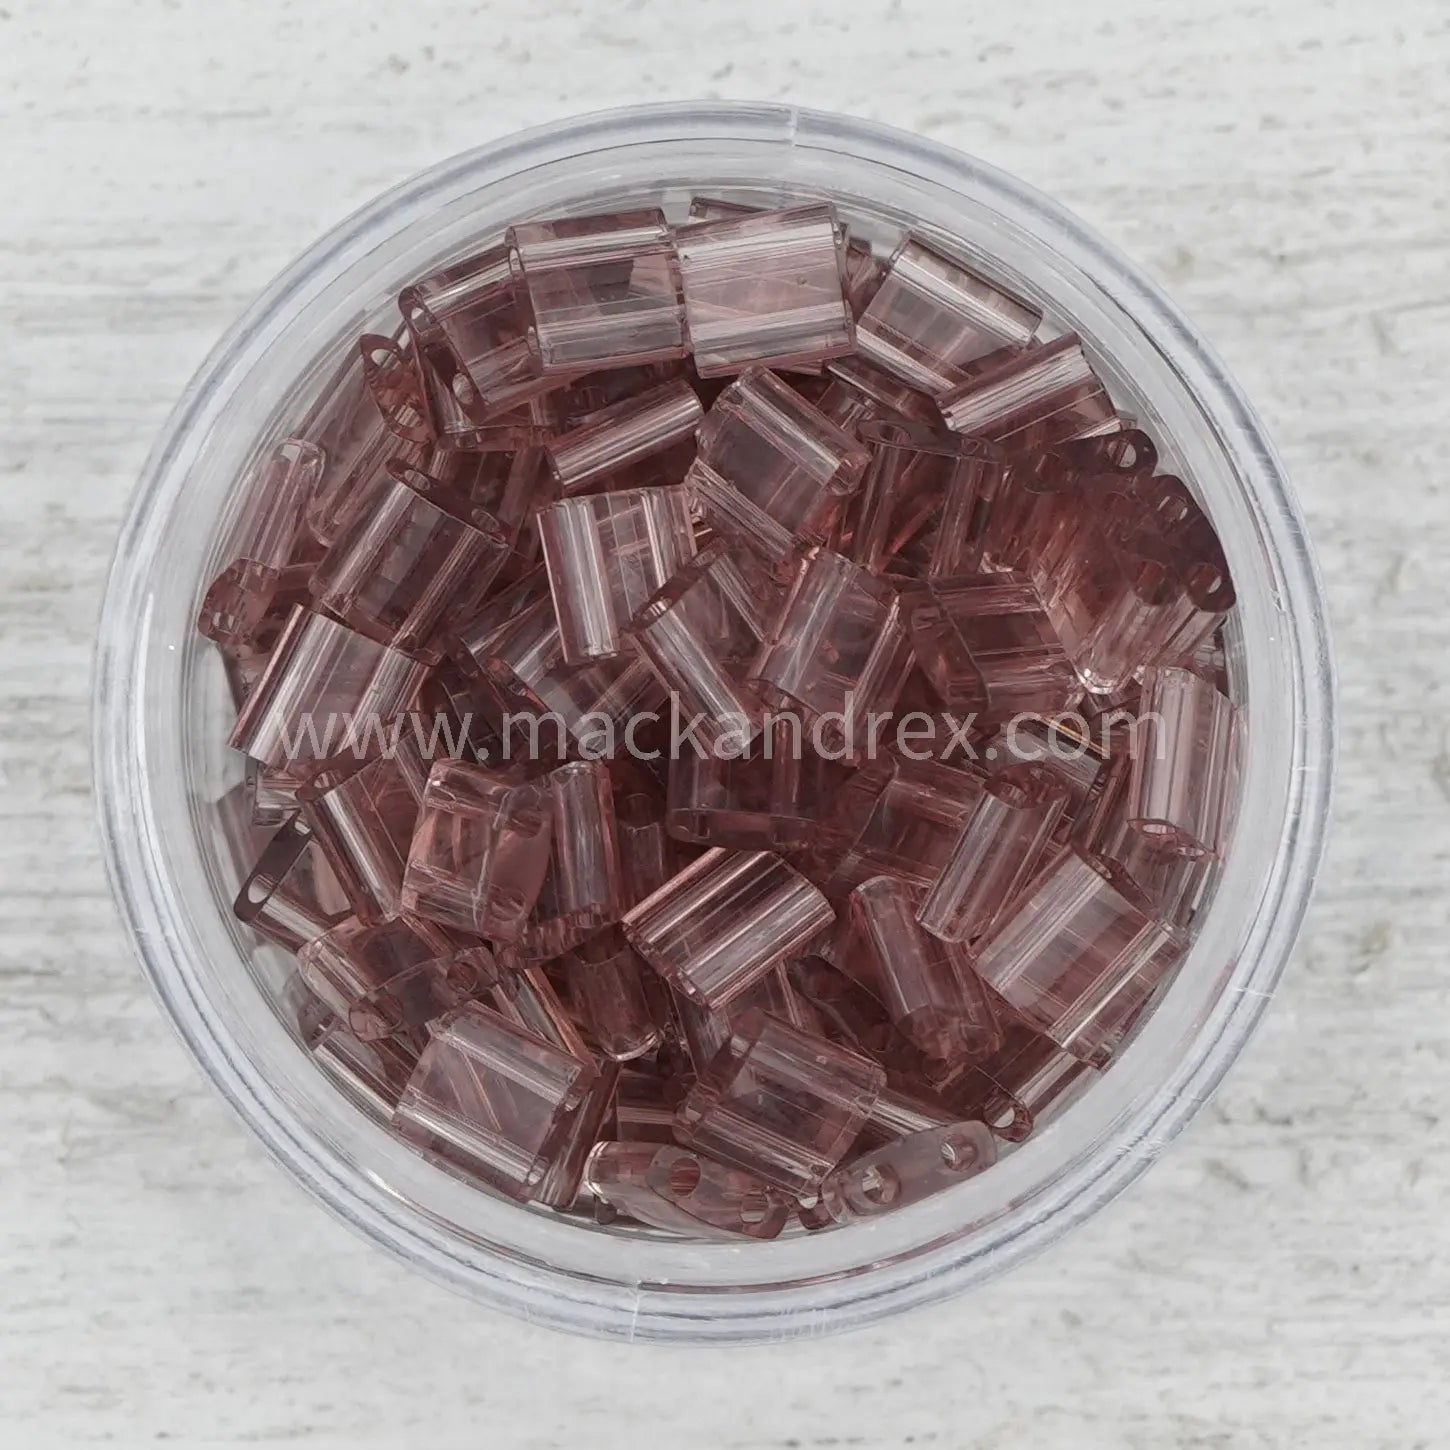 a bowl of chocolate colored glass beads